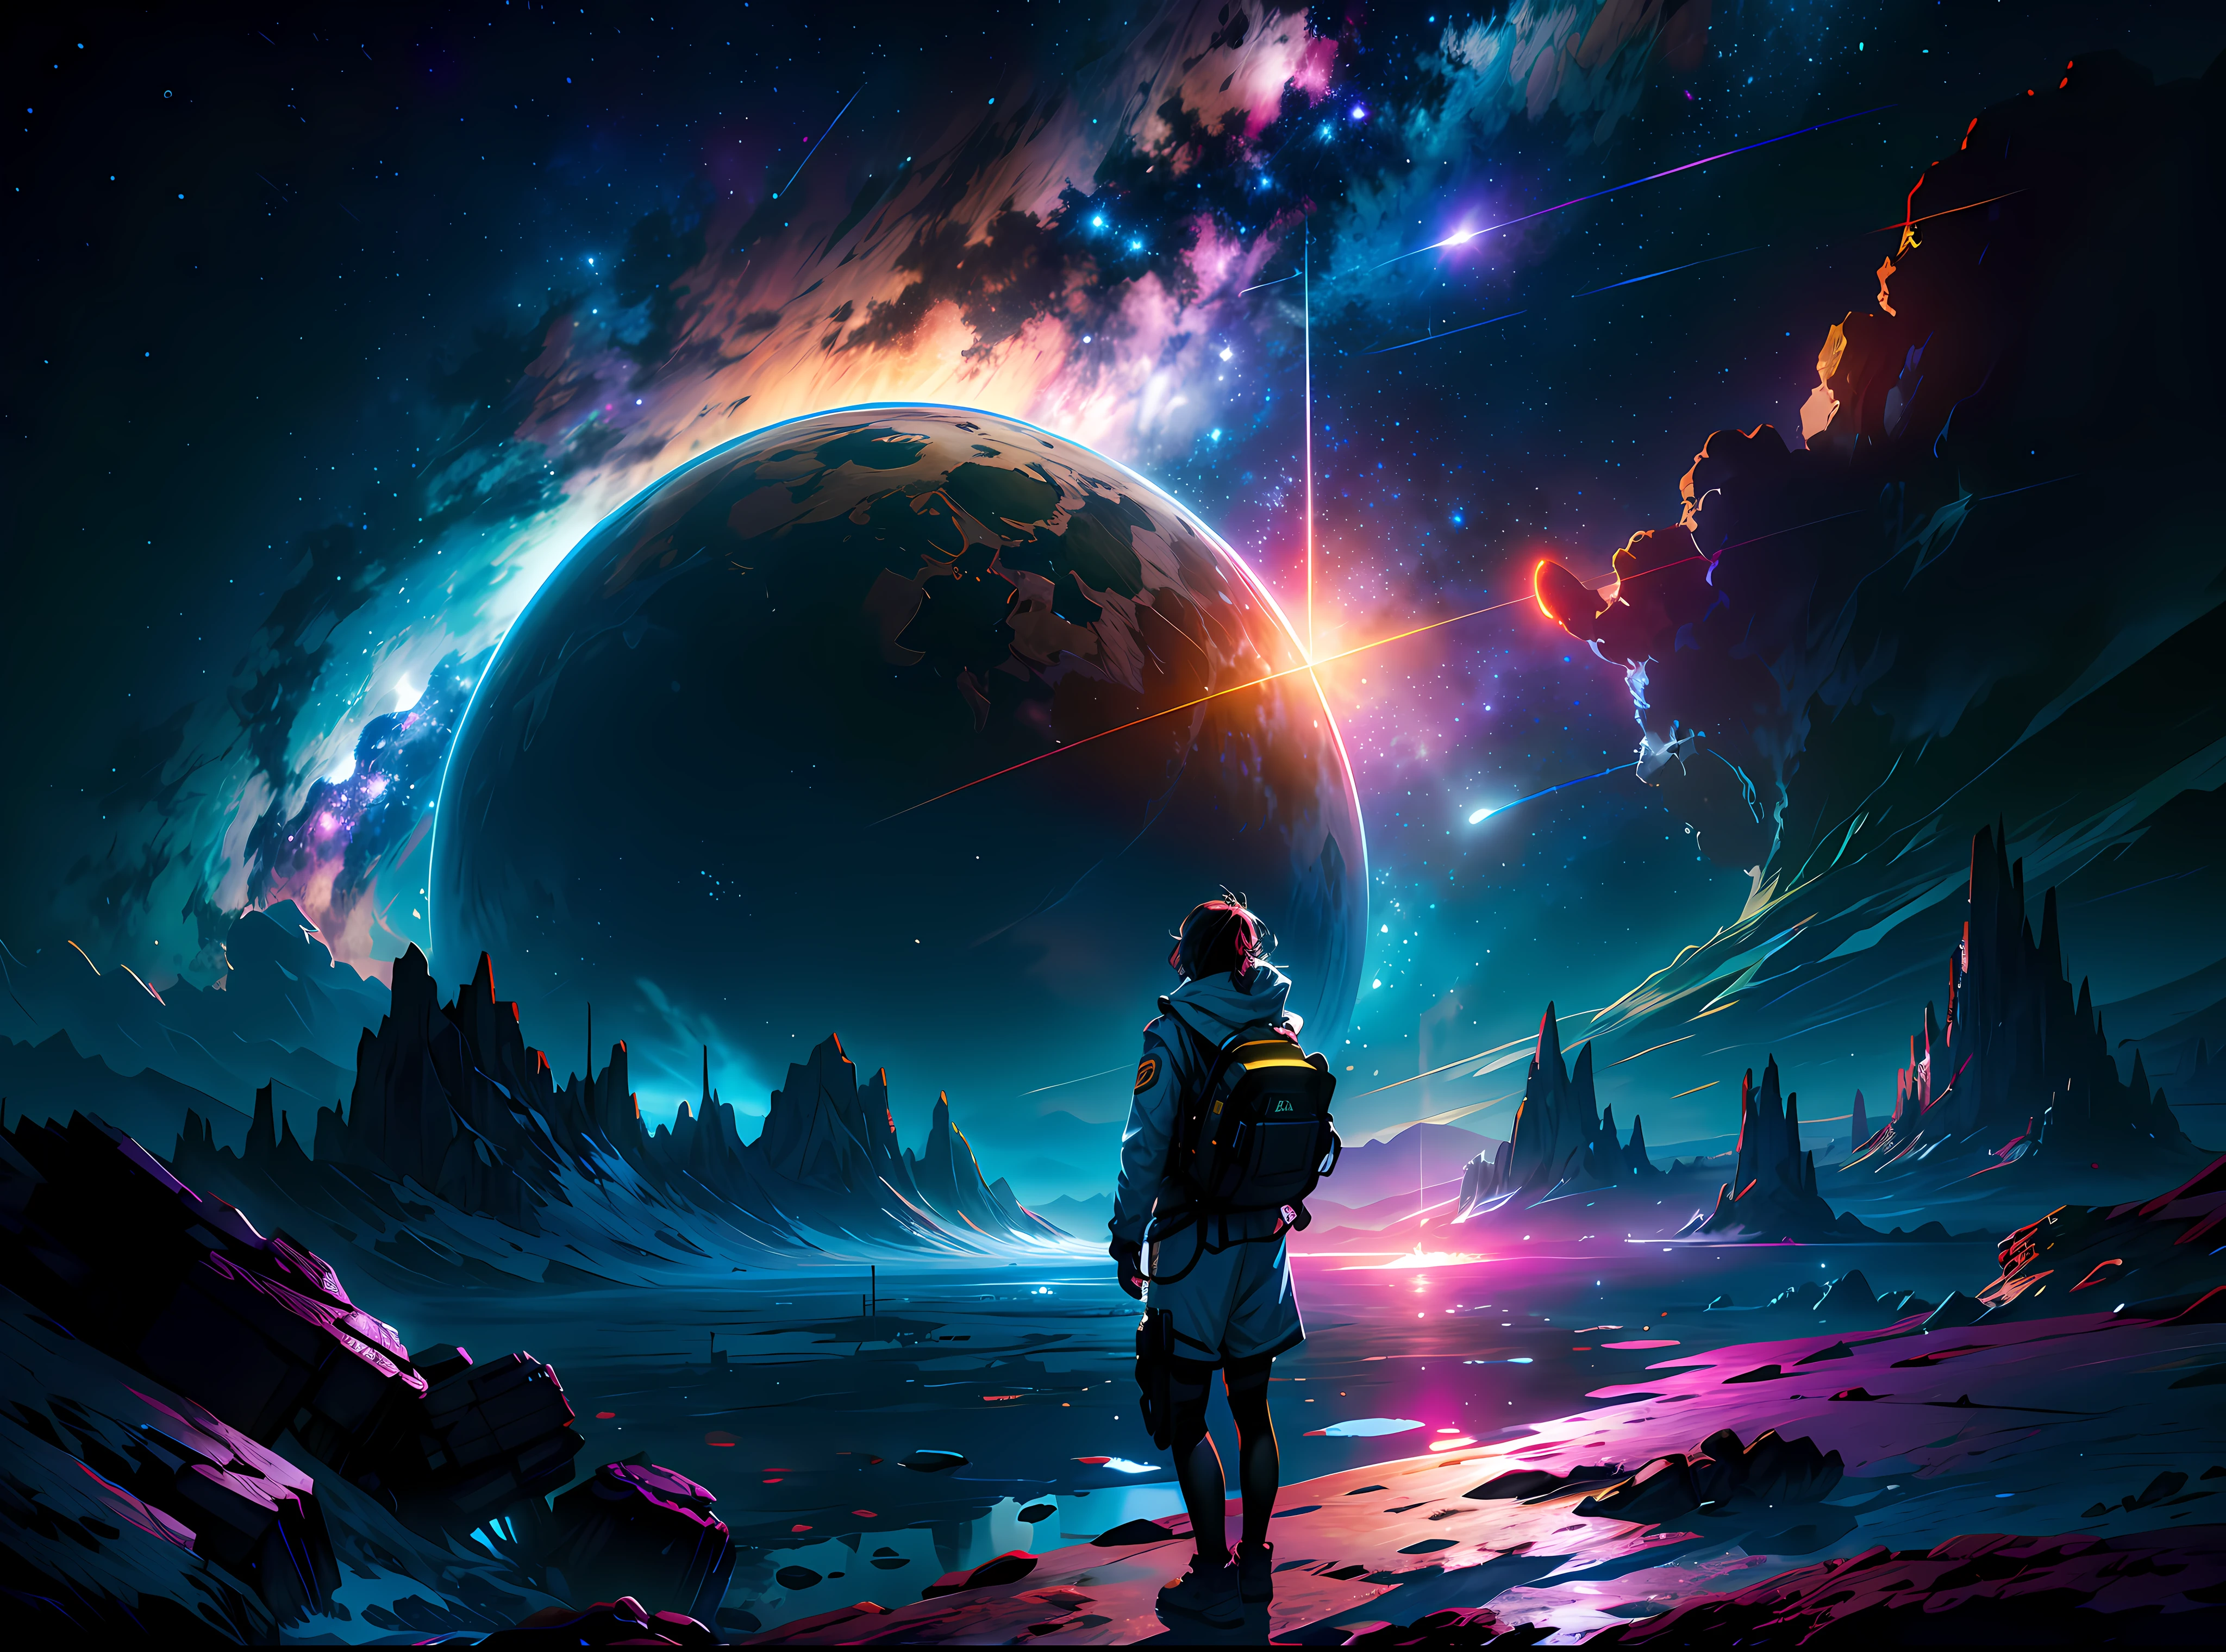 Draw a young female programmer, sitting on a research platform floating in the middle of an asteroid belt.She is studying with a notebook, surrounded by several asteroids glowing with fiery auras BREAK Dramatic lighting from distant stars and planets illuminates the scene, casting deep shadows on the suit. The young woman looks confident and determined, looking at the vast and mysterious universe with wonder and respect,BREAK,Detailed,Realistic,4k highly detailed digital art,octane render, bioluminescent, BREAK 8K resolution concept art, realism,by Mappa studios,masterpiece,best quality,official art,illustration,ligne claire,(cool_color),perfect composition,absurdres, fantasy,focused,rule of thirds